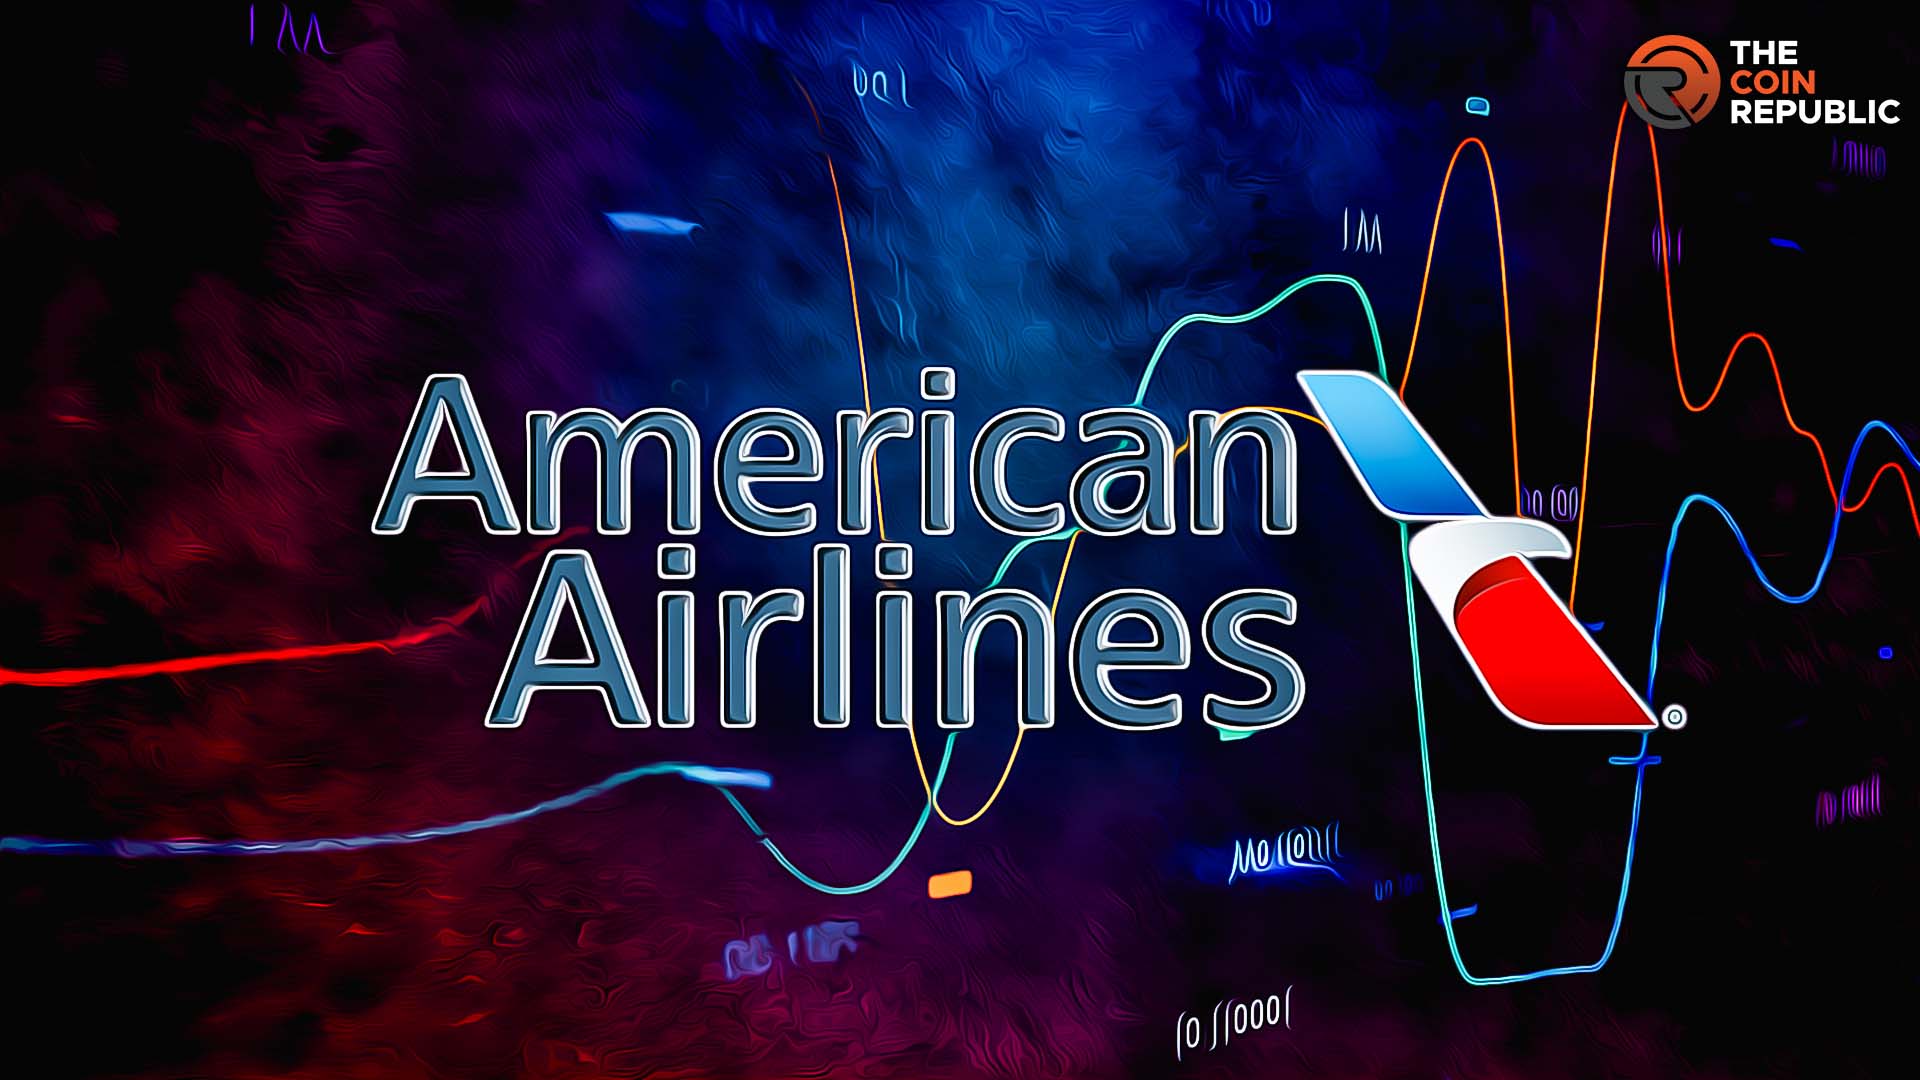 Will Optimism for American Airlines Make AAL Stock Price Takeoff?